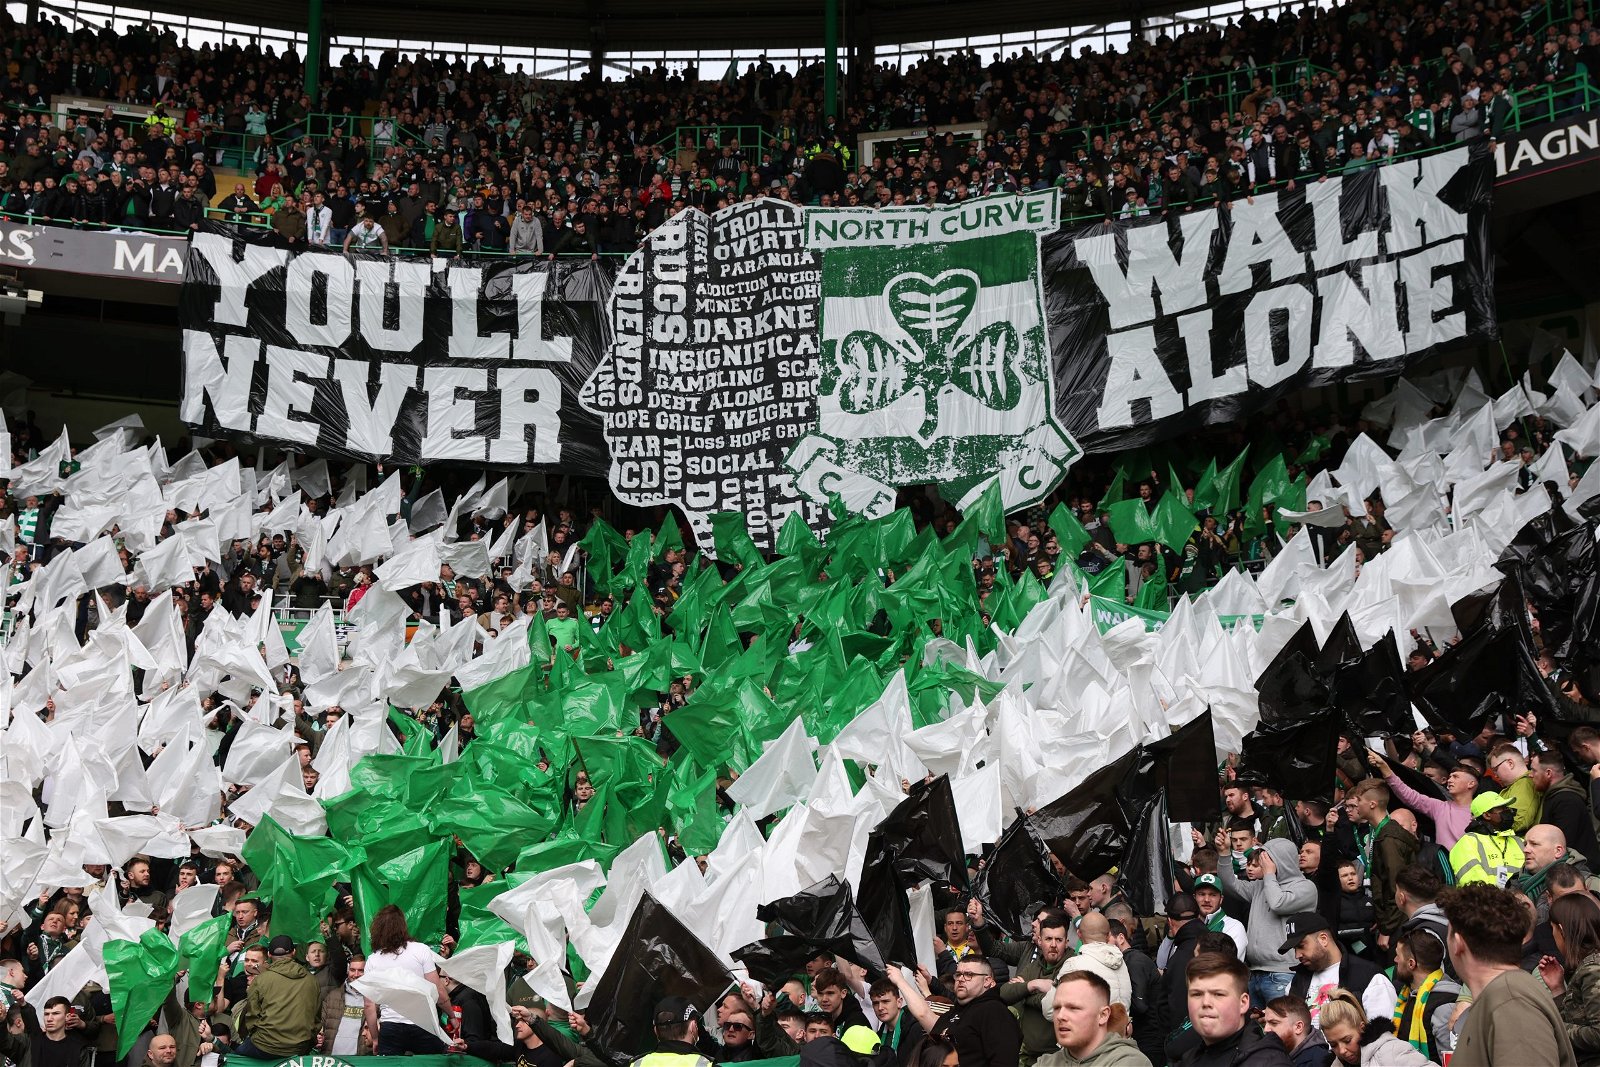 Celtic Fans Set To Be In The Spotlight Again As Our Enemies Pursue